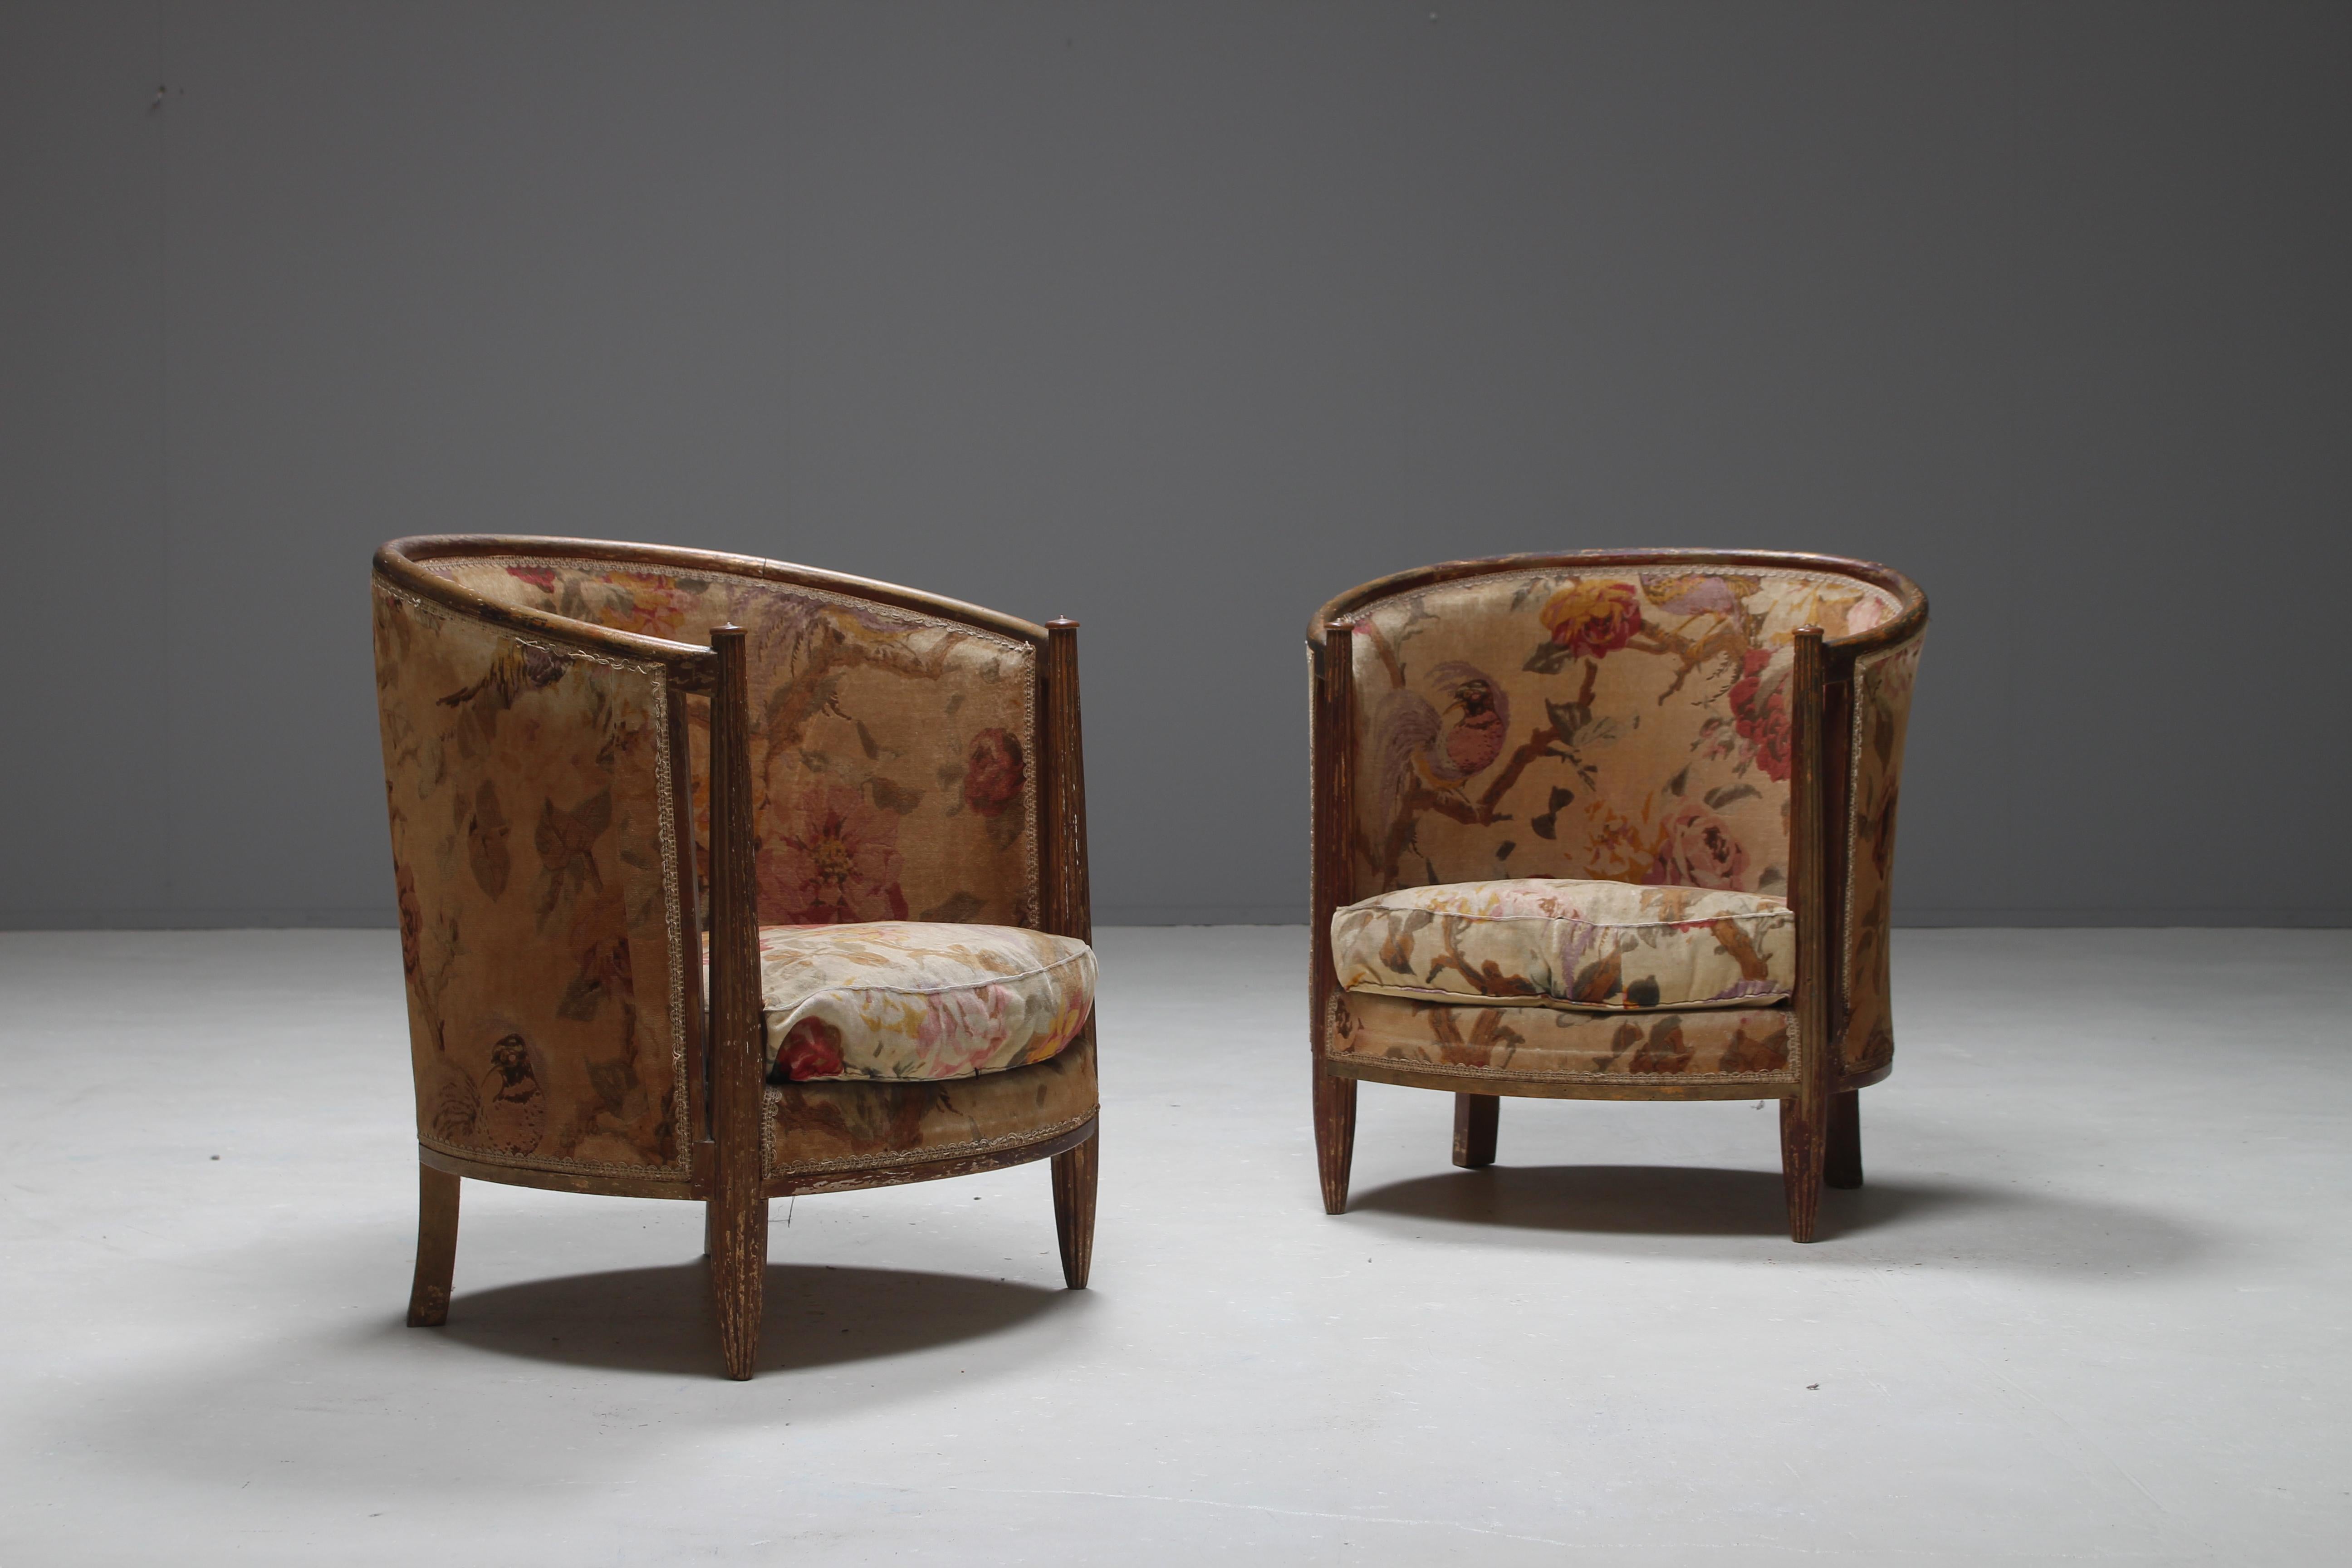 Early 20th Century Important Early and Rare Gilded Paul Follot Art Nouveau Club Chairs, 1911 For Sale